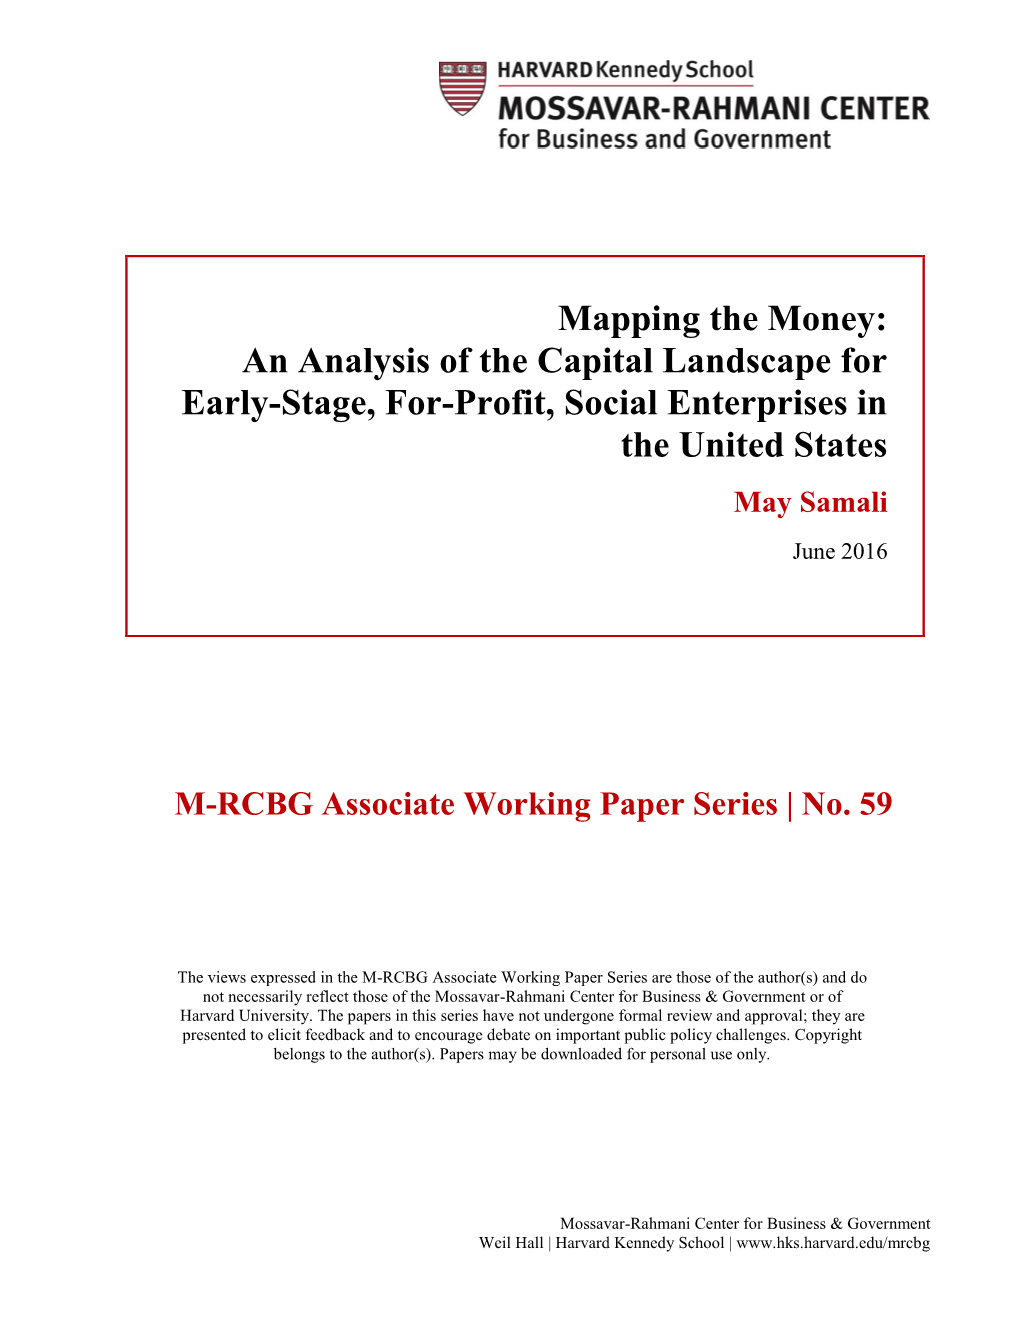 Mapping the Money: an Analysis of the Capital Landscape for Early-Stage, For-Profit, Social Enterprises in the United States